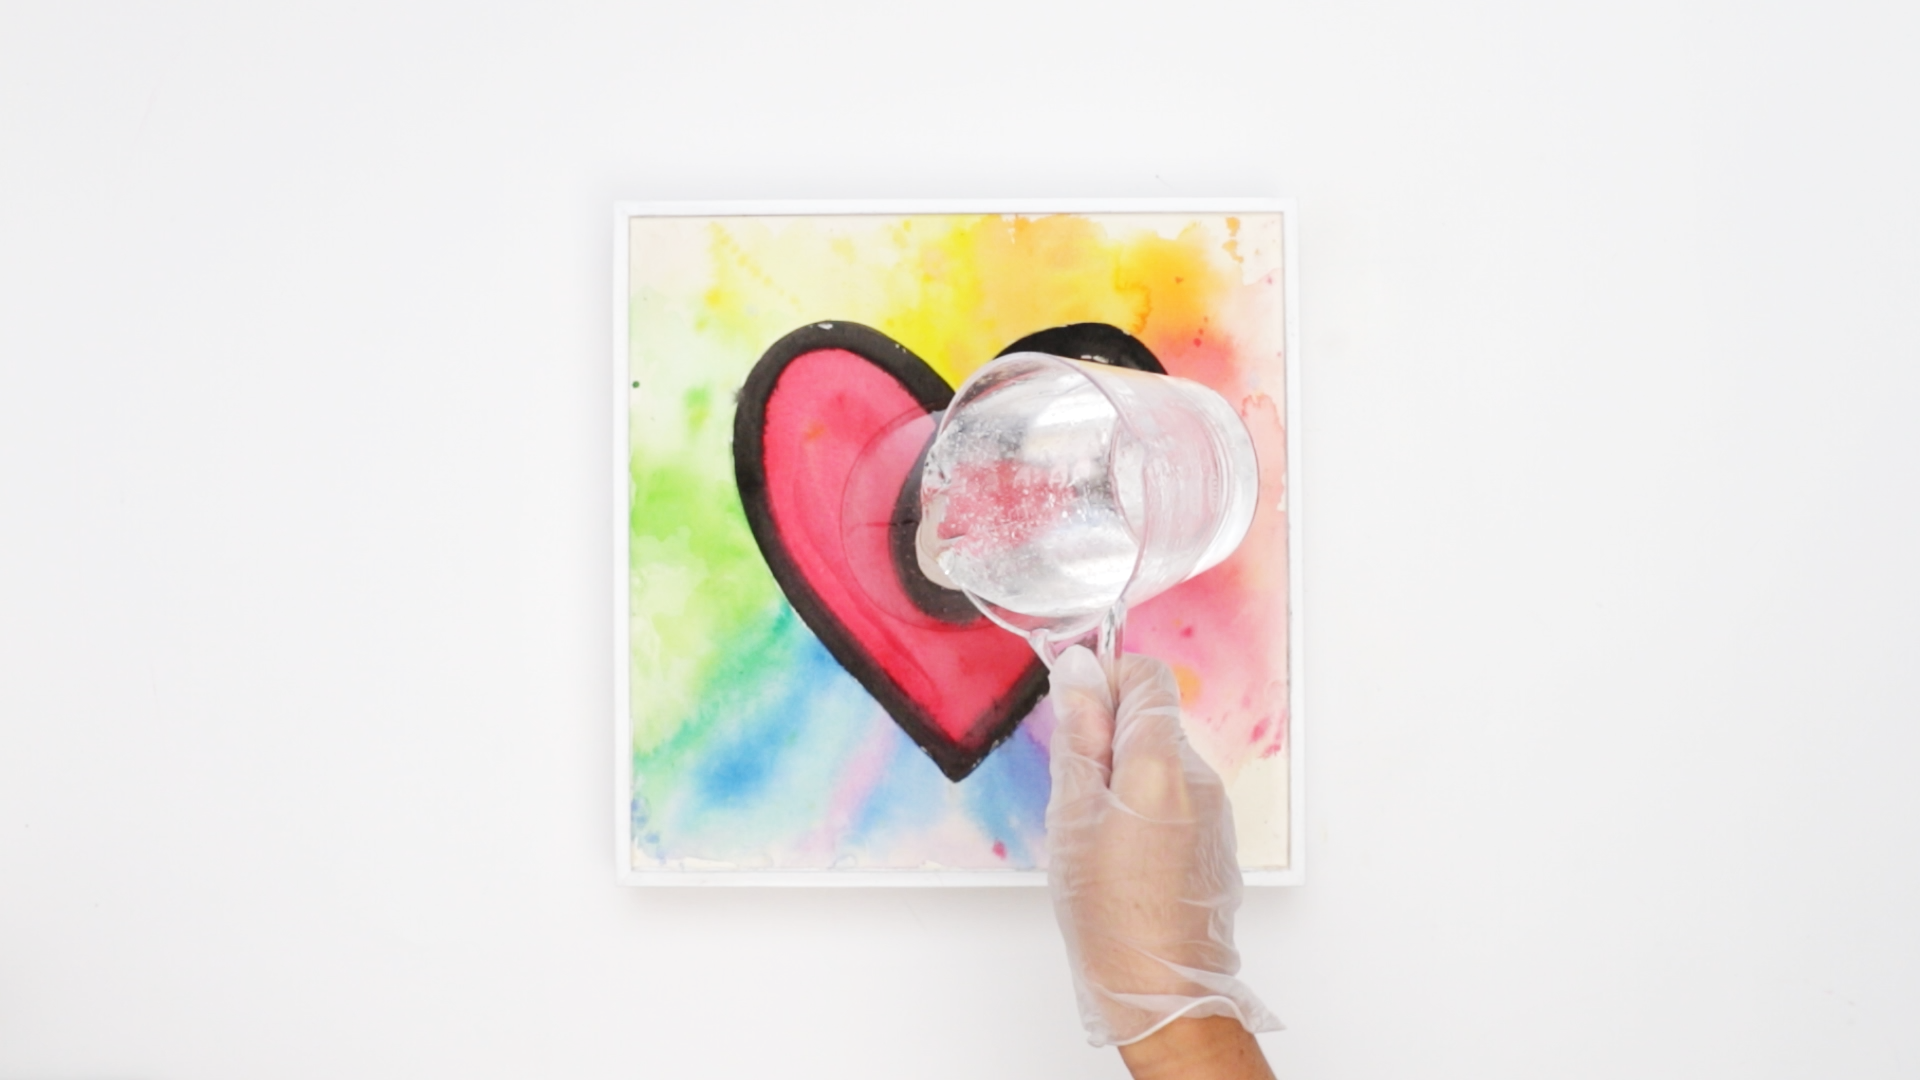 How To Resin Watercolor: Pour the ArtResin